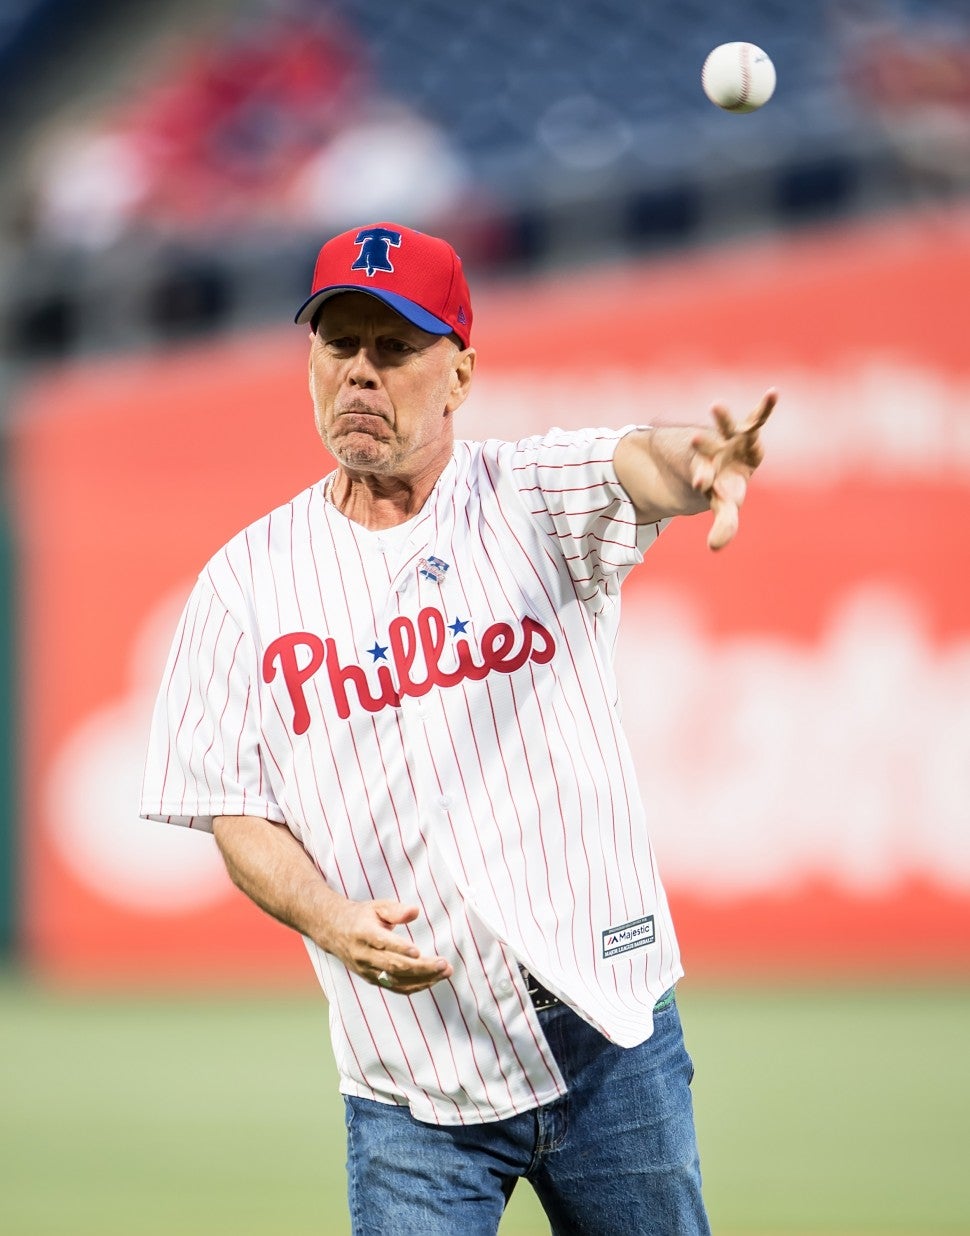 Bruce Willis throws out first pitch in Phillies game